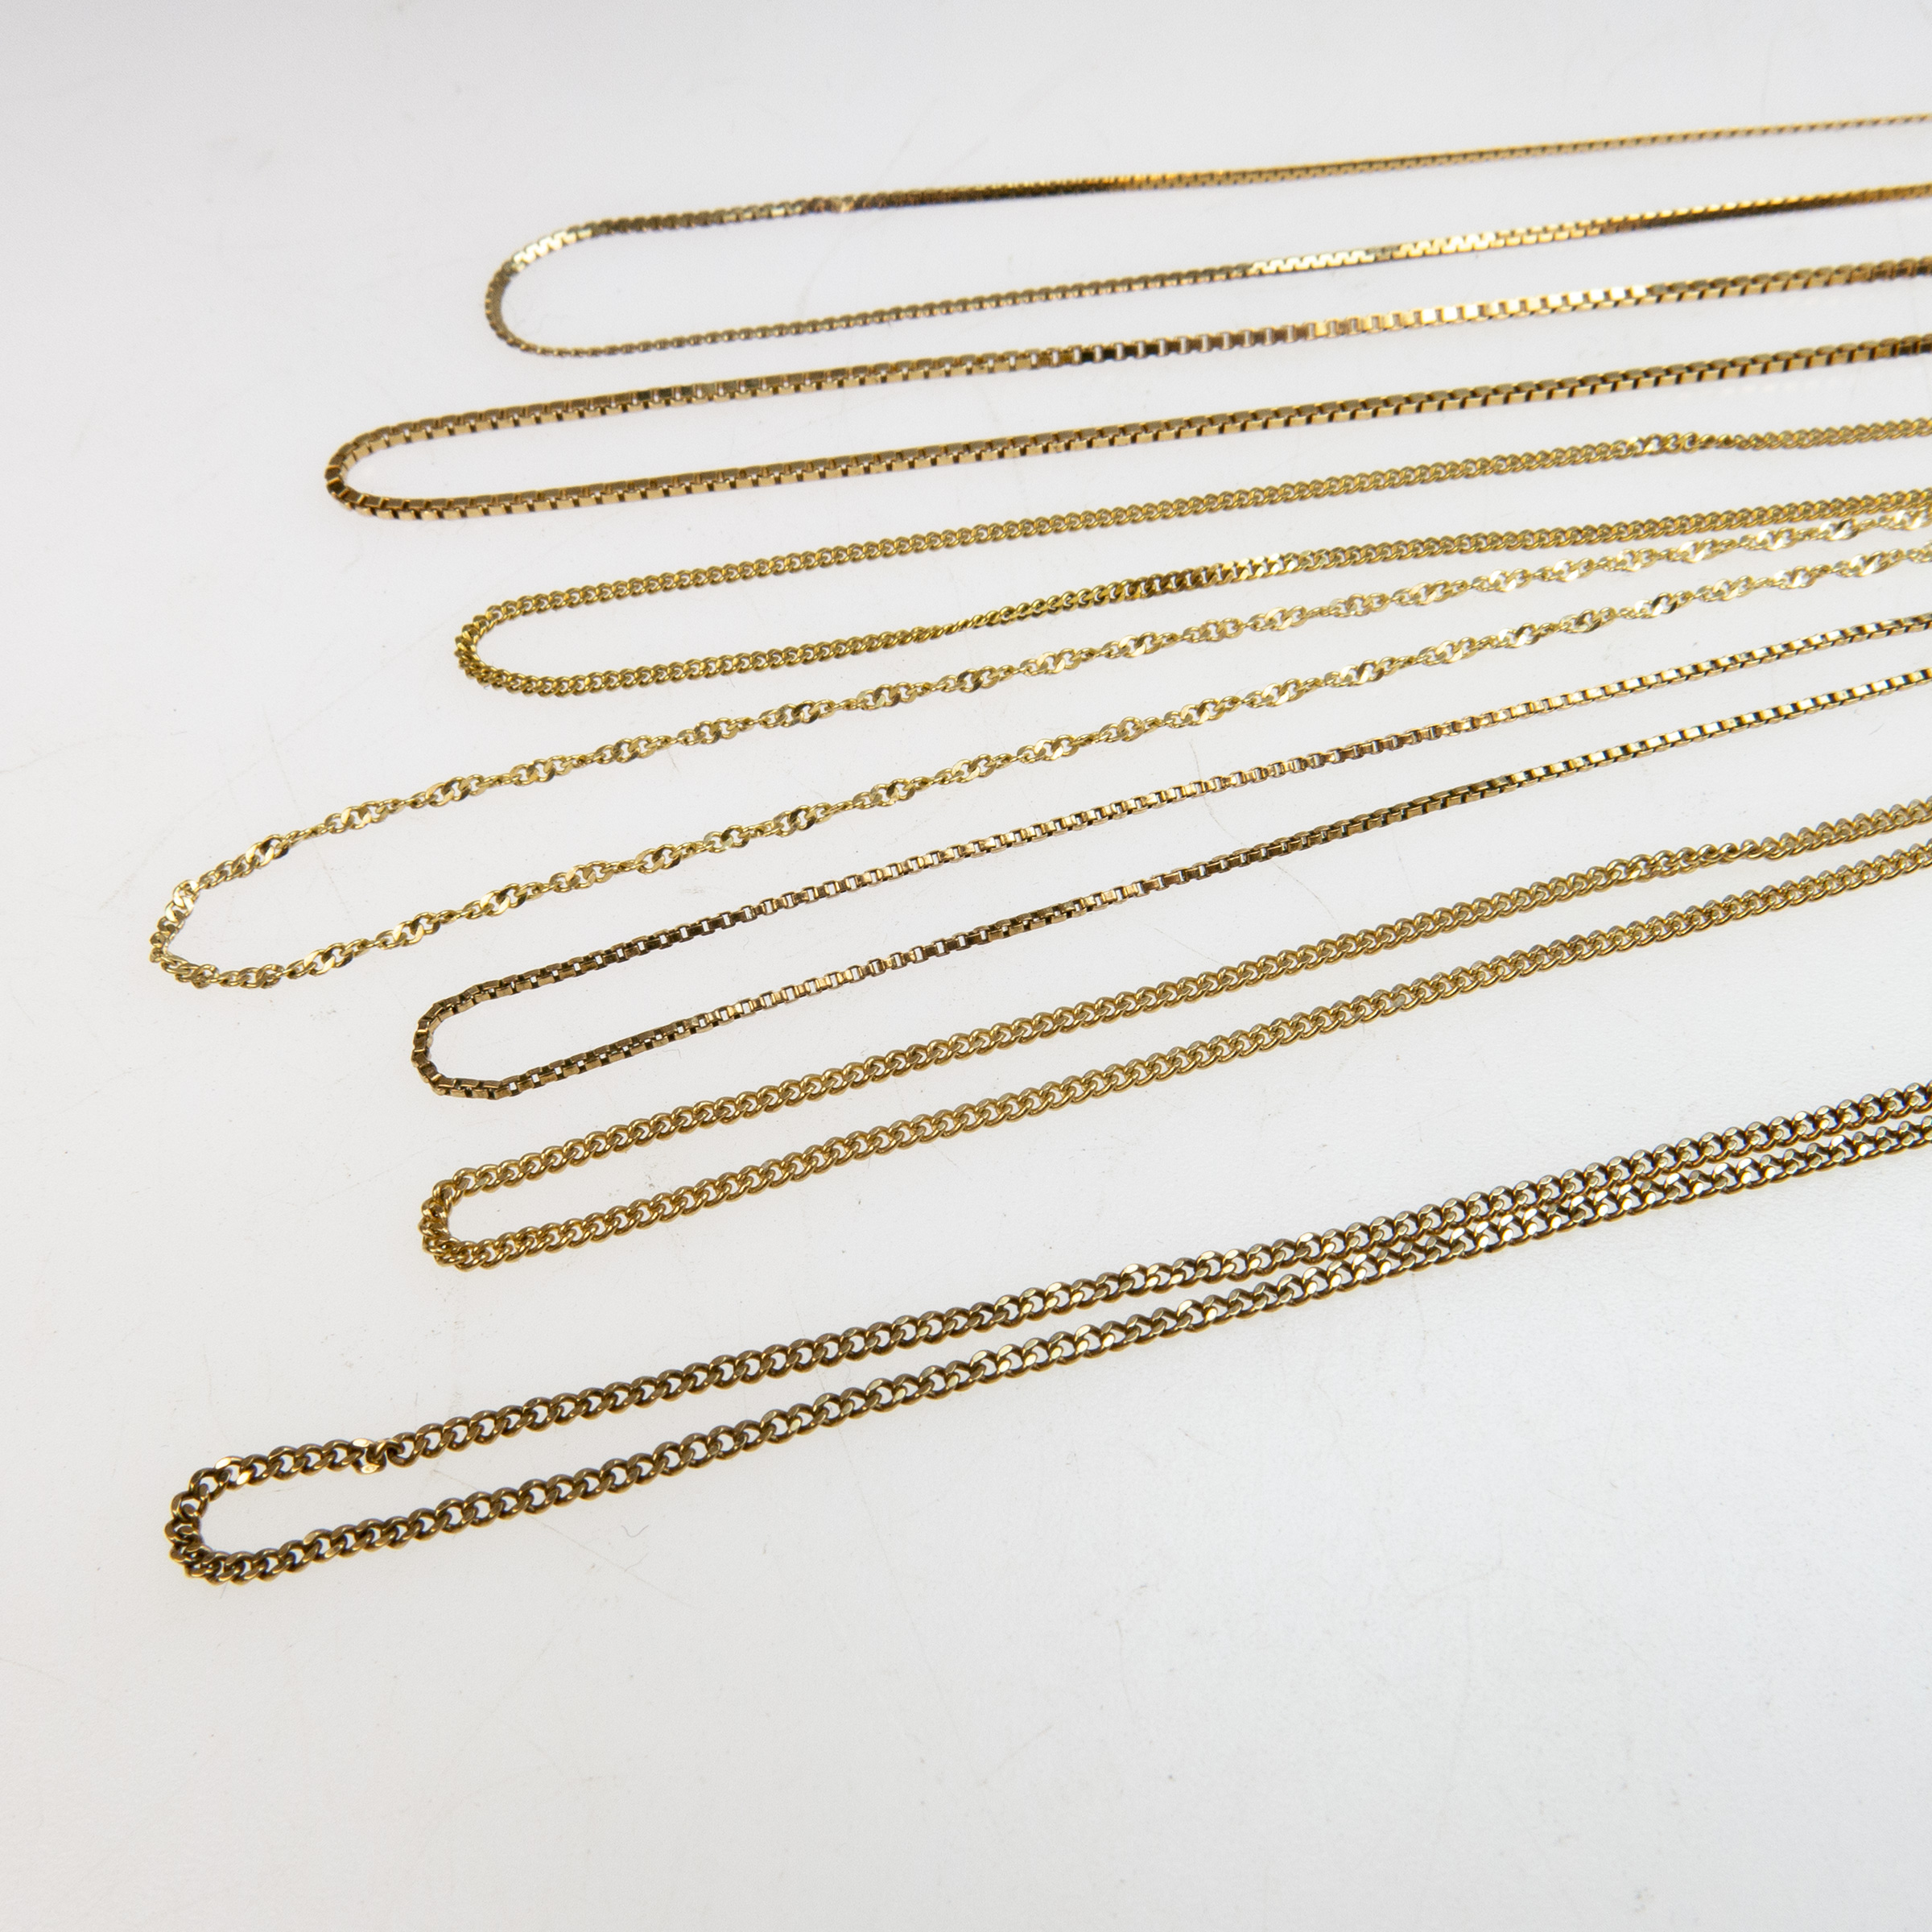 7 x 10k Yellow Gold Chains